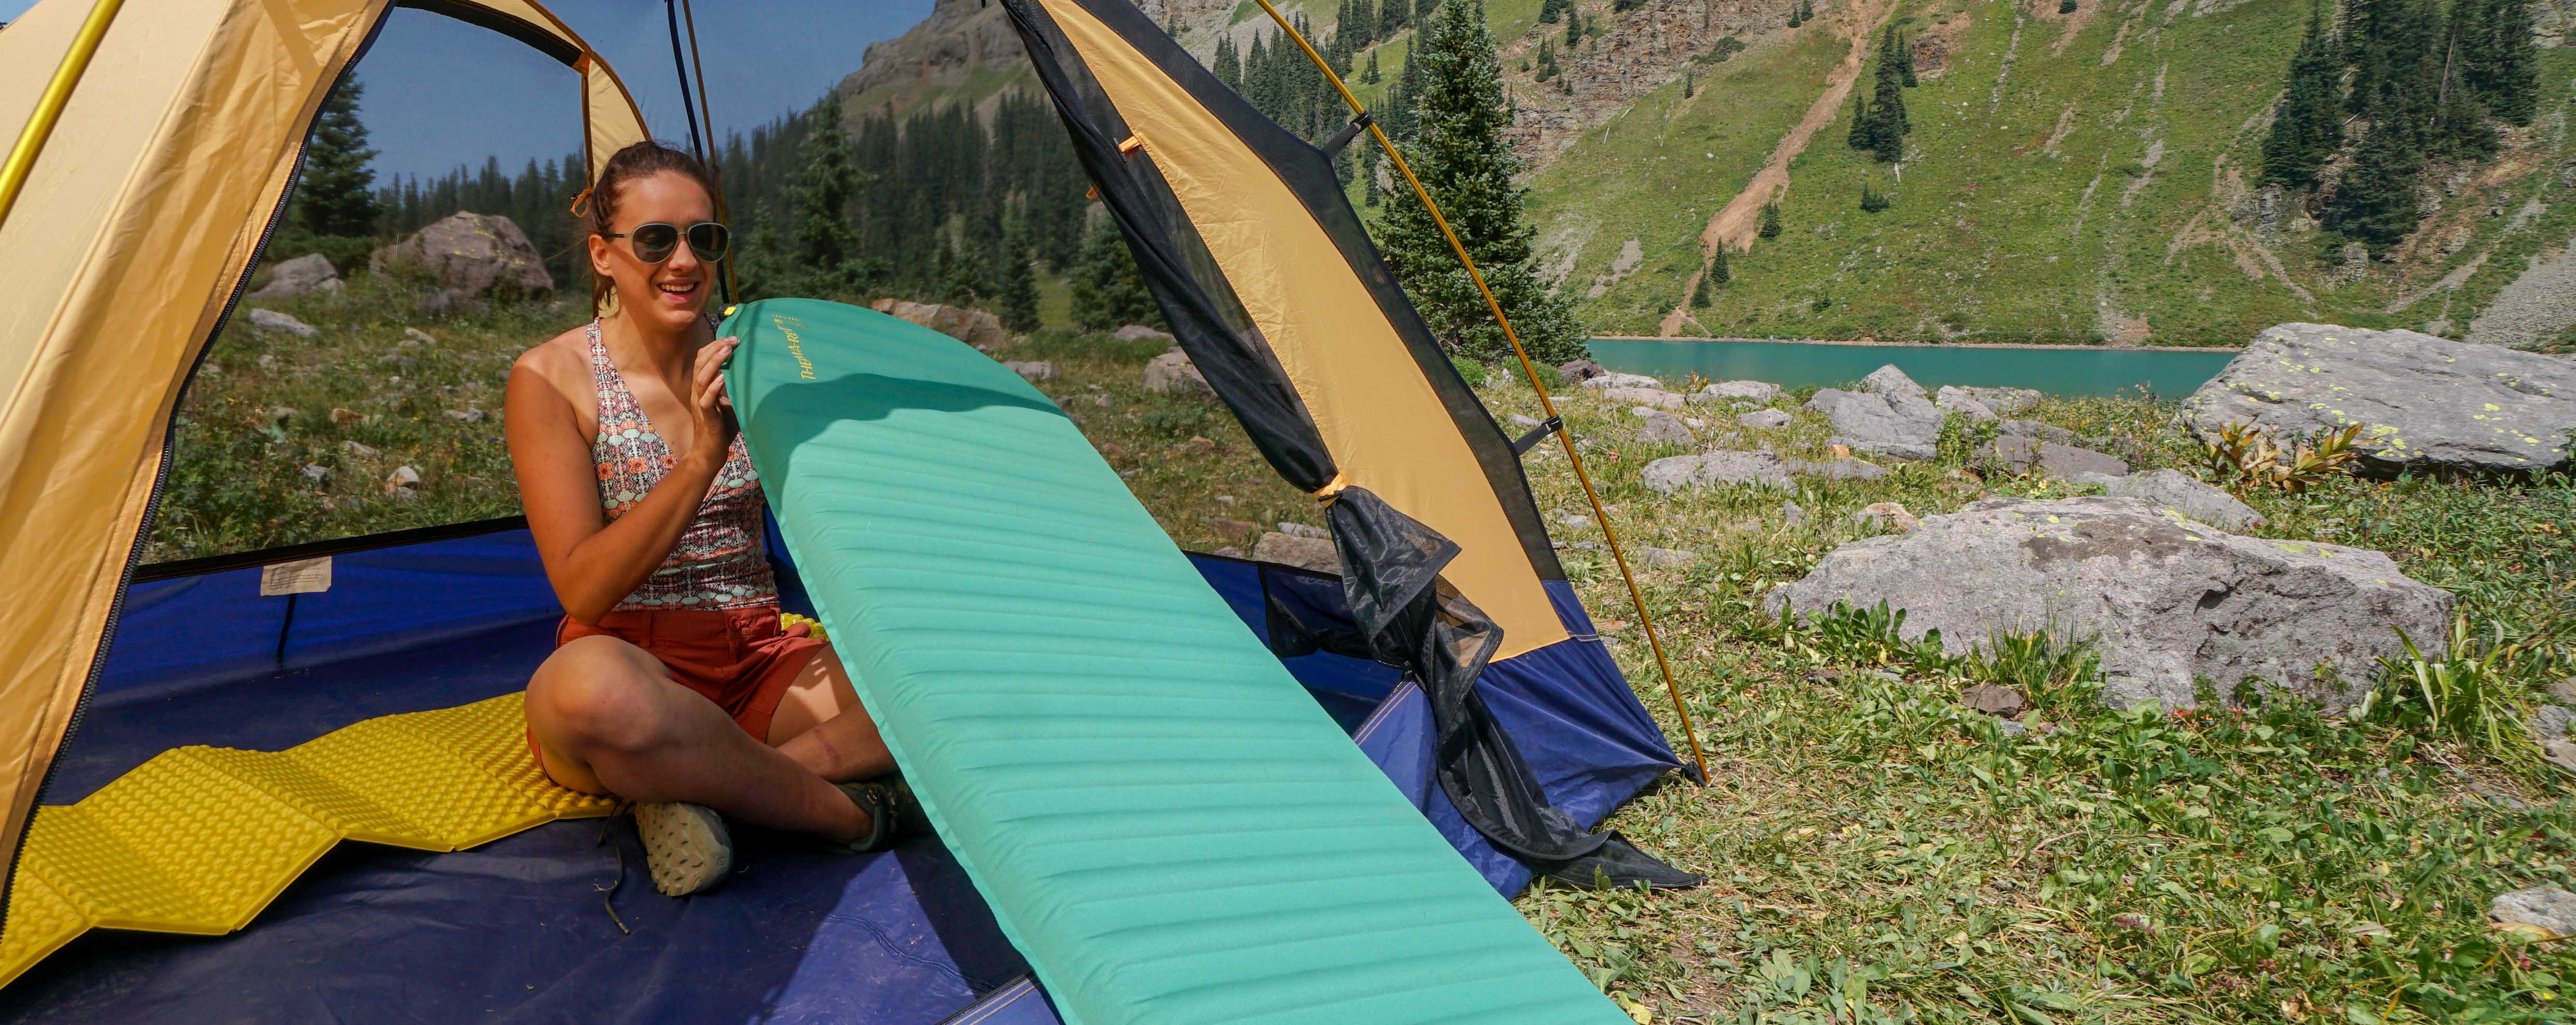 thermarest-trailpro-review-dirtbagdreams.com